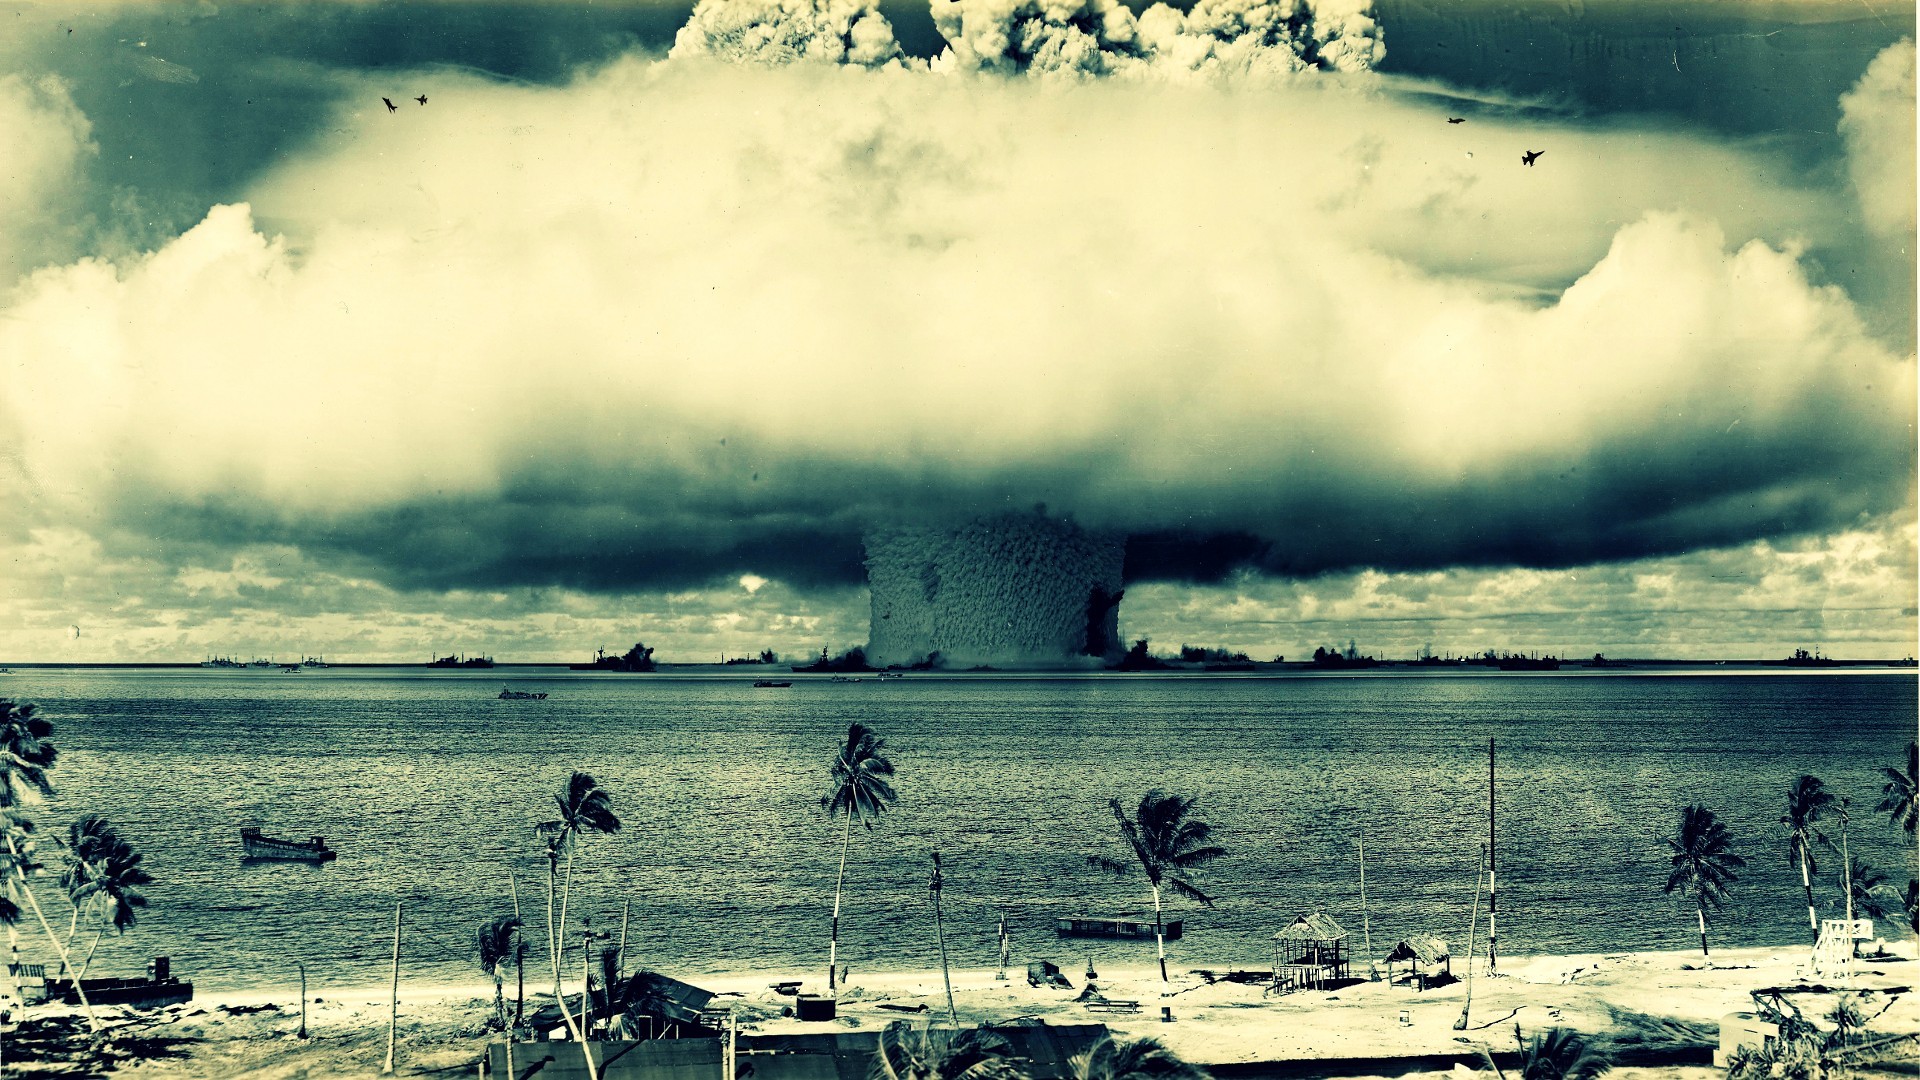 General 1920x1080 nuclear bombs Bomber explosion atomic bomb history